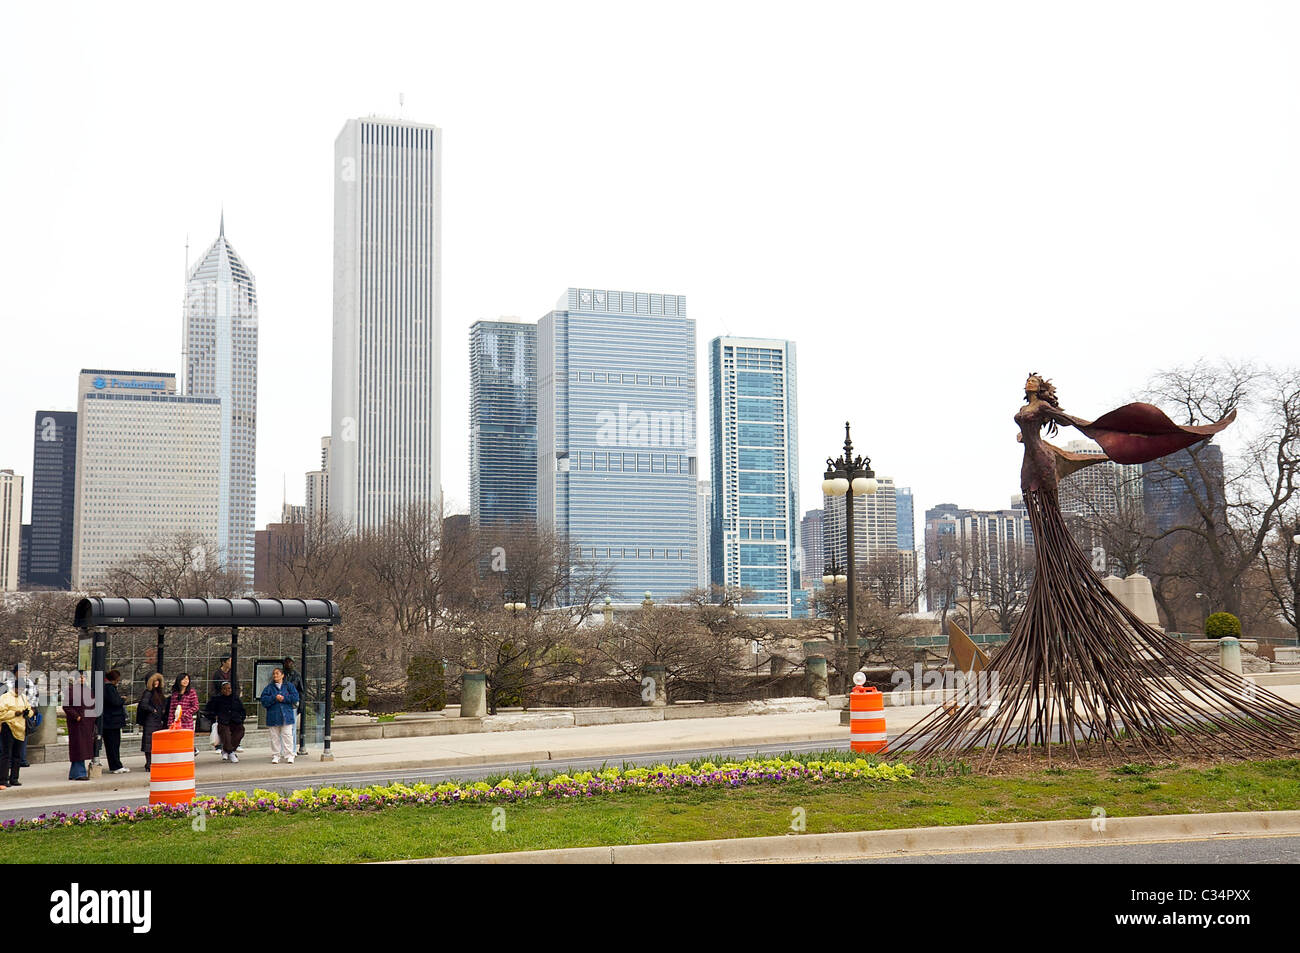 Art Nouveau sculpture on a street near a bus stop in downtown Chicago, modern skyline in the background Stock Photo